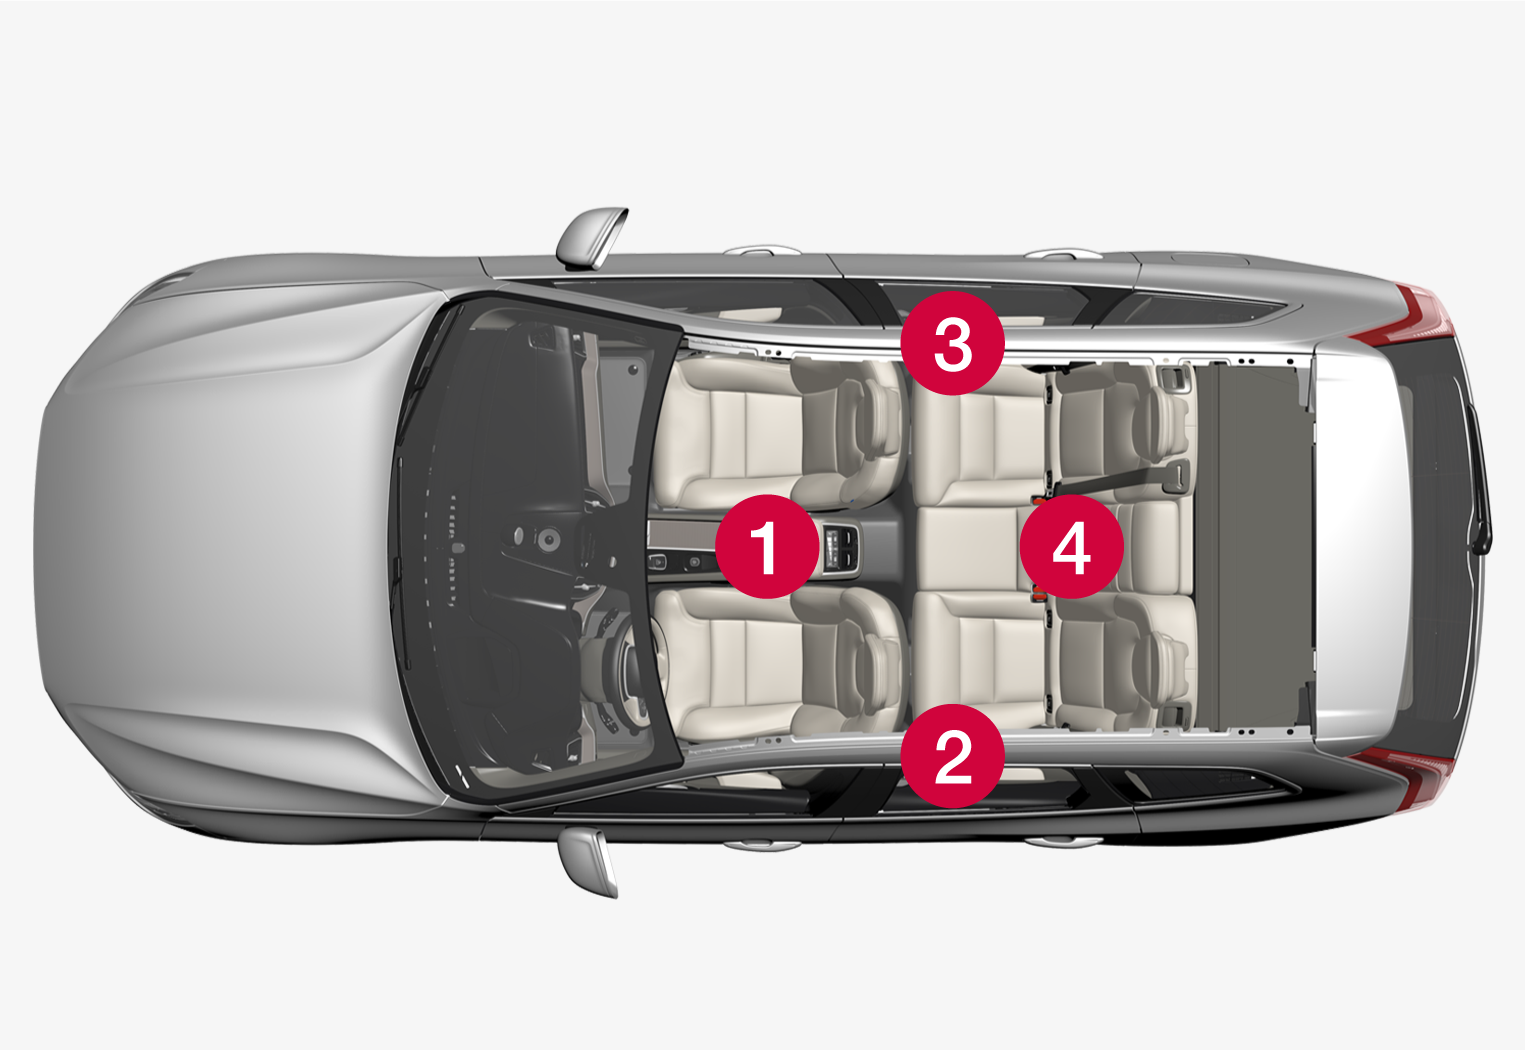 P5-XC60-2146-Antenna placements start and lock system